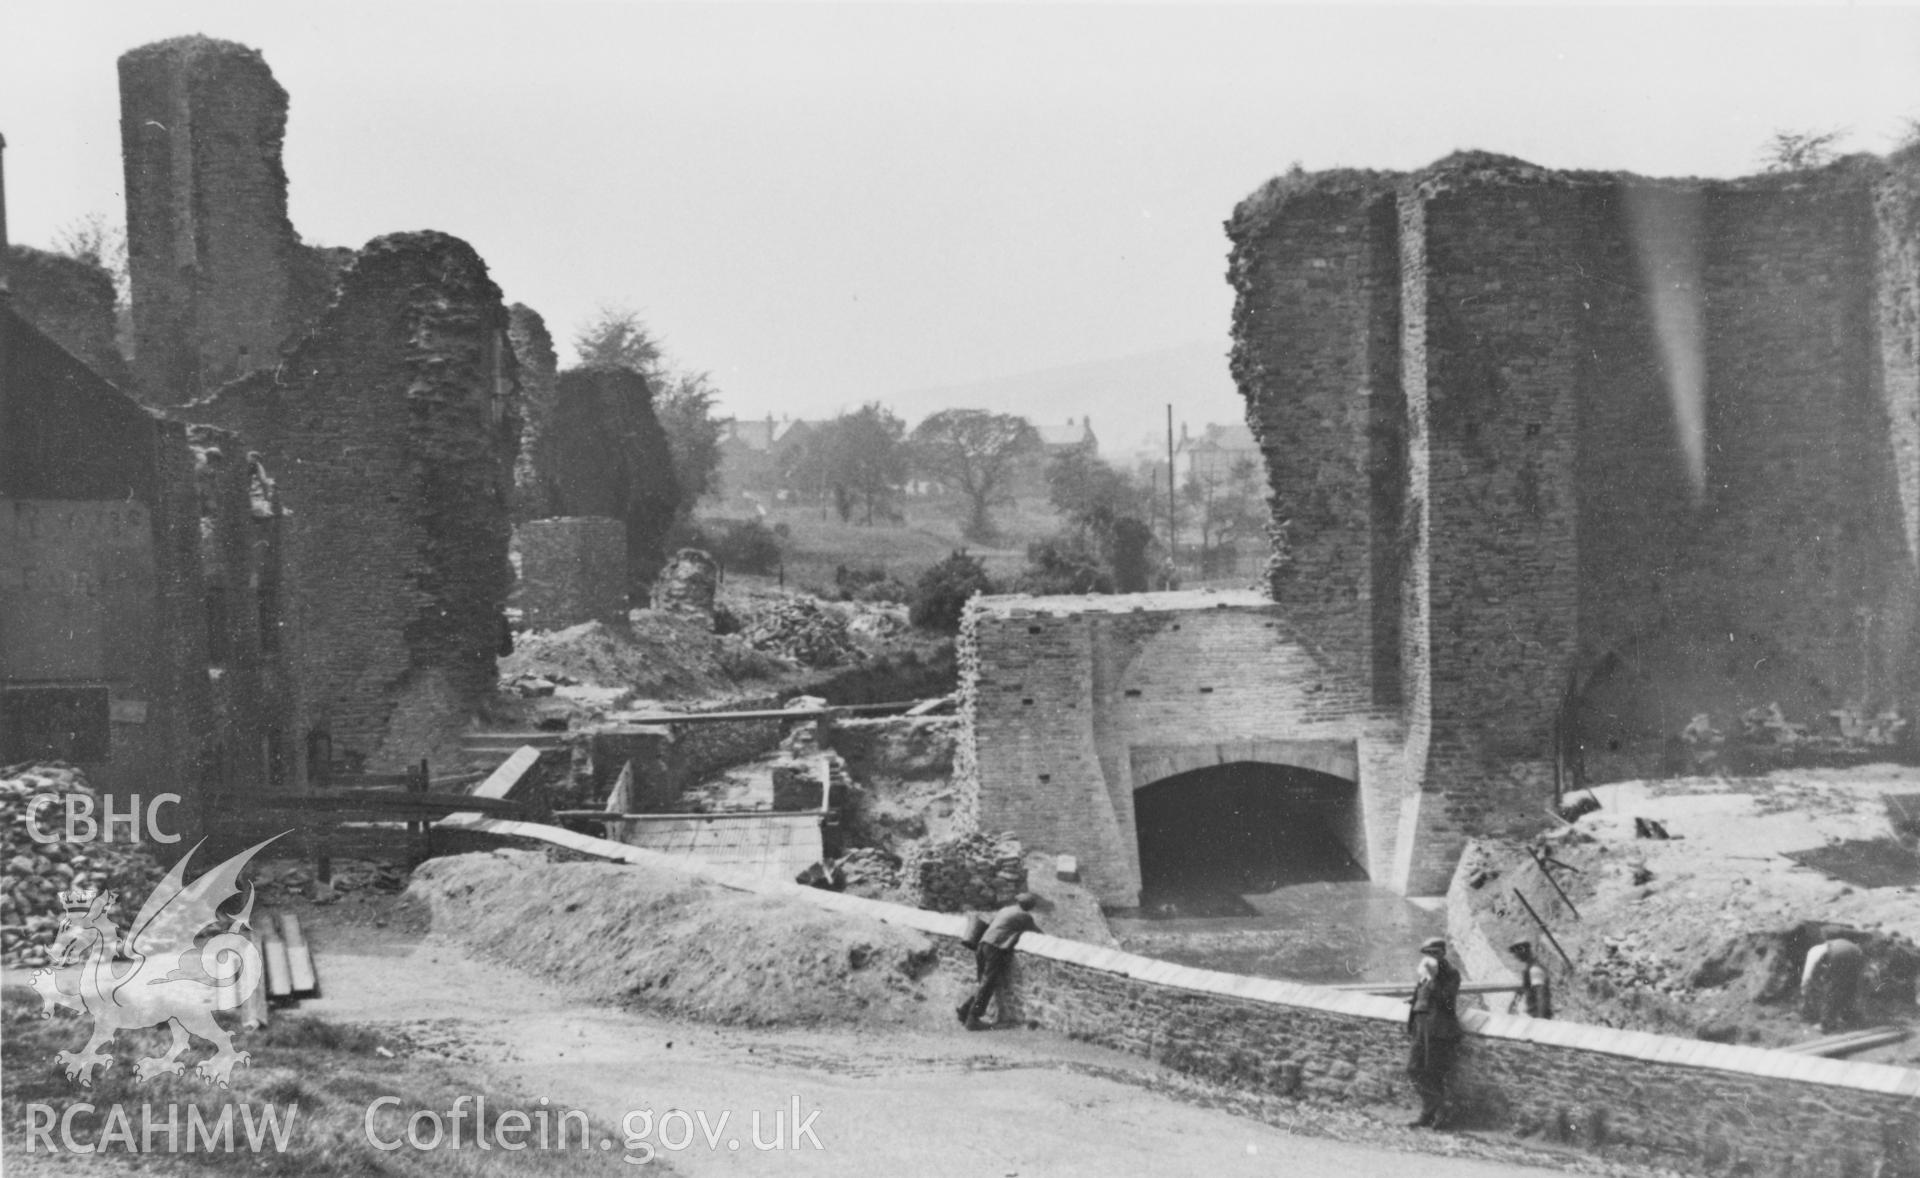 Black and white acetate negative showing Caerphilly Castle